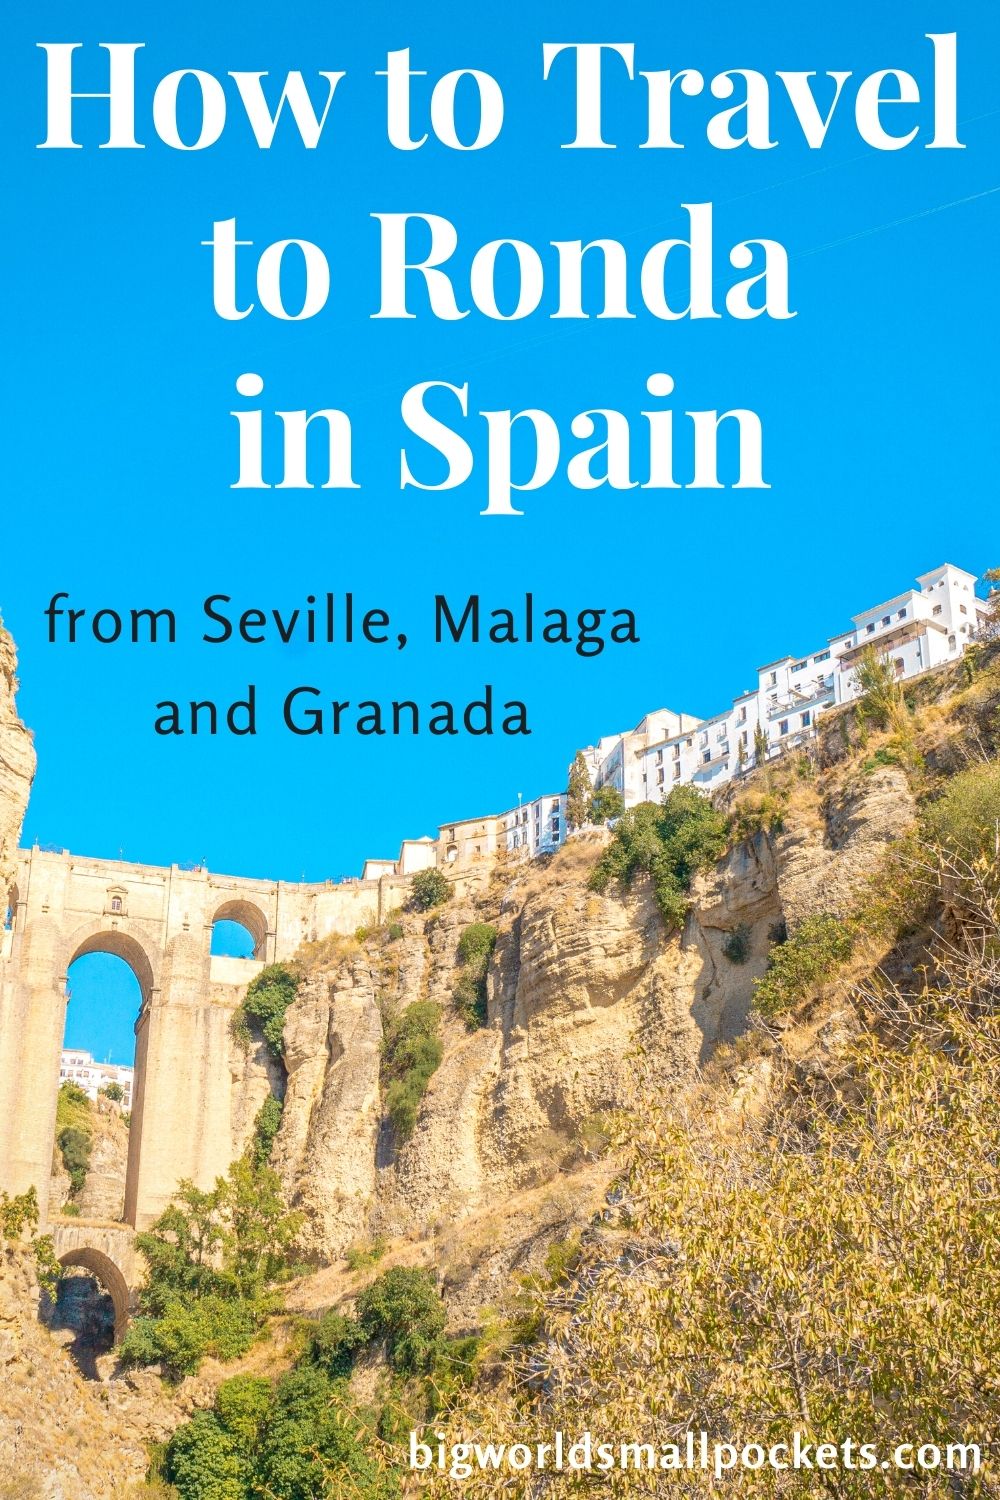 How to Travel to Ronda in Spain